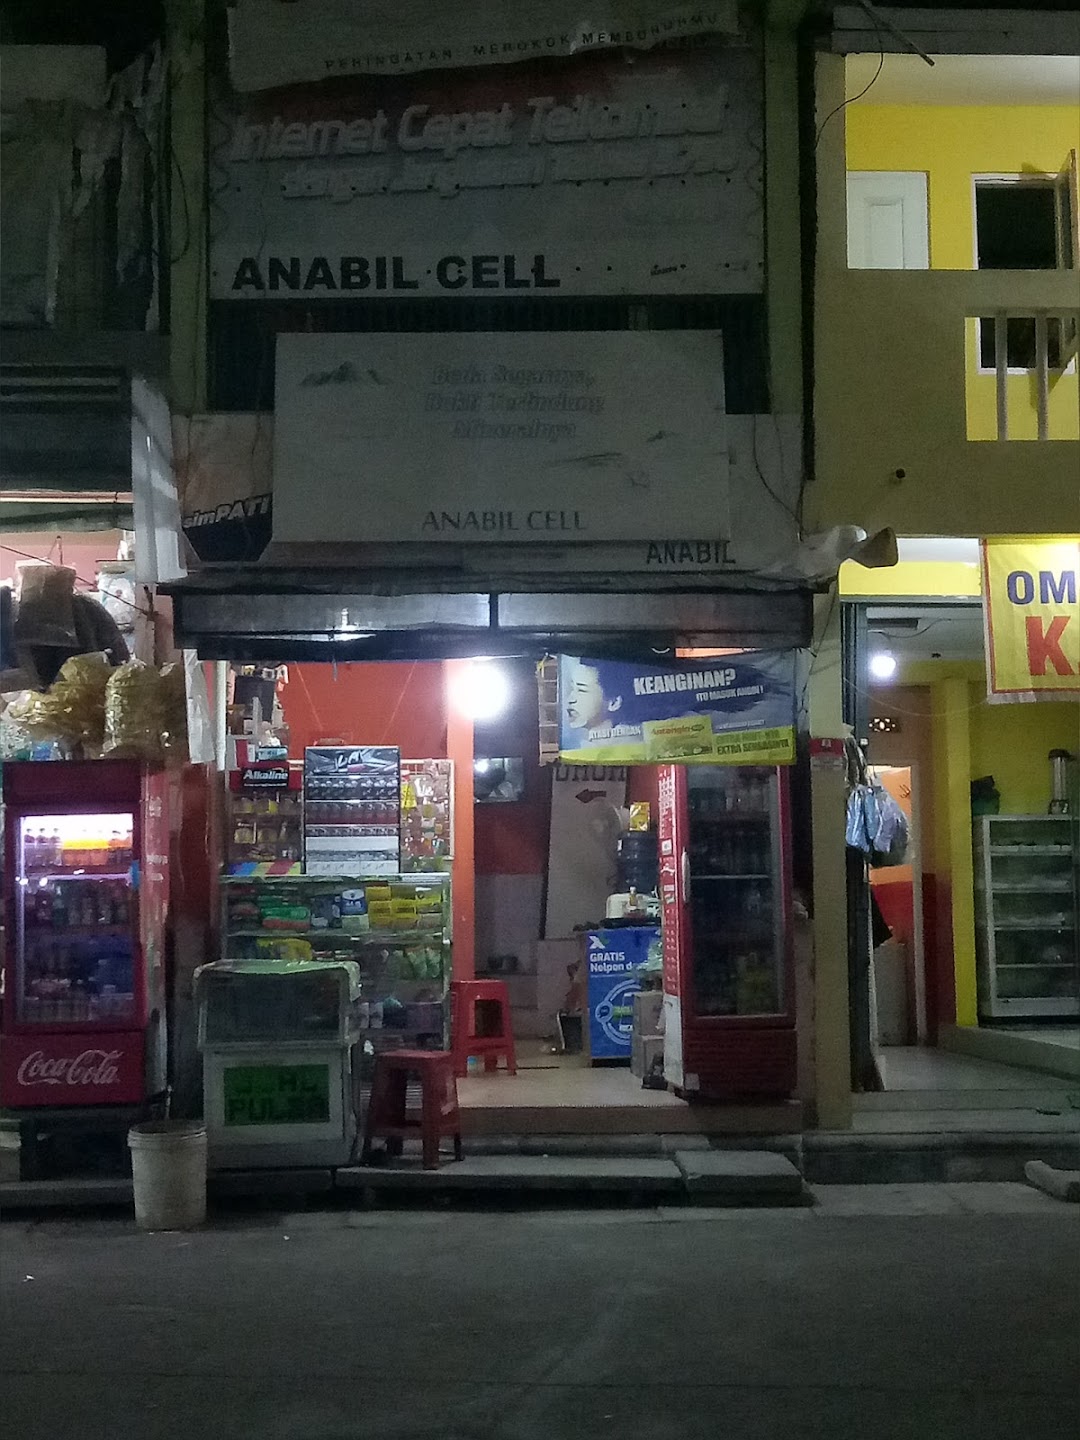 Toko Anabil Cell (Udin)